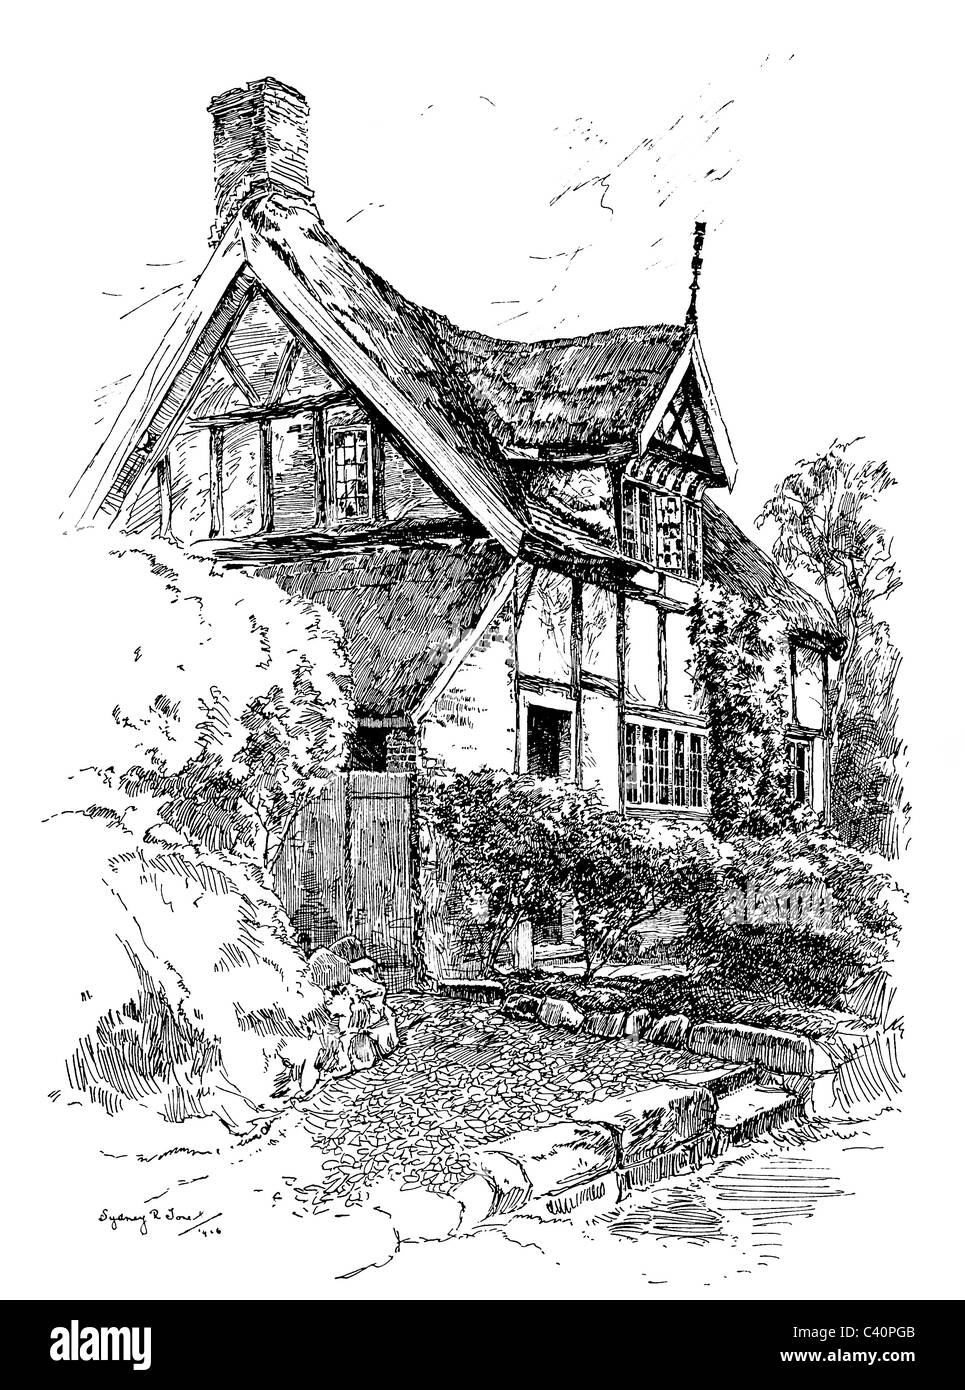 Alderley Edge, Cheshire - pen and ink illustration from 'Old English Country Cottages' by Charles Holme, 1906. Stock Photo